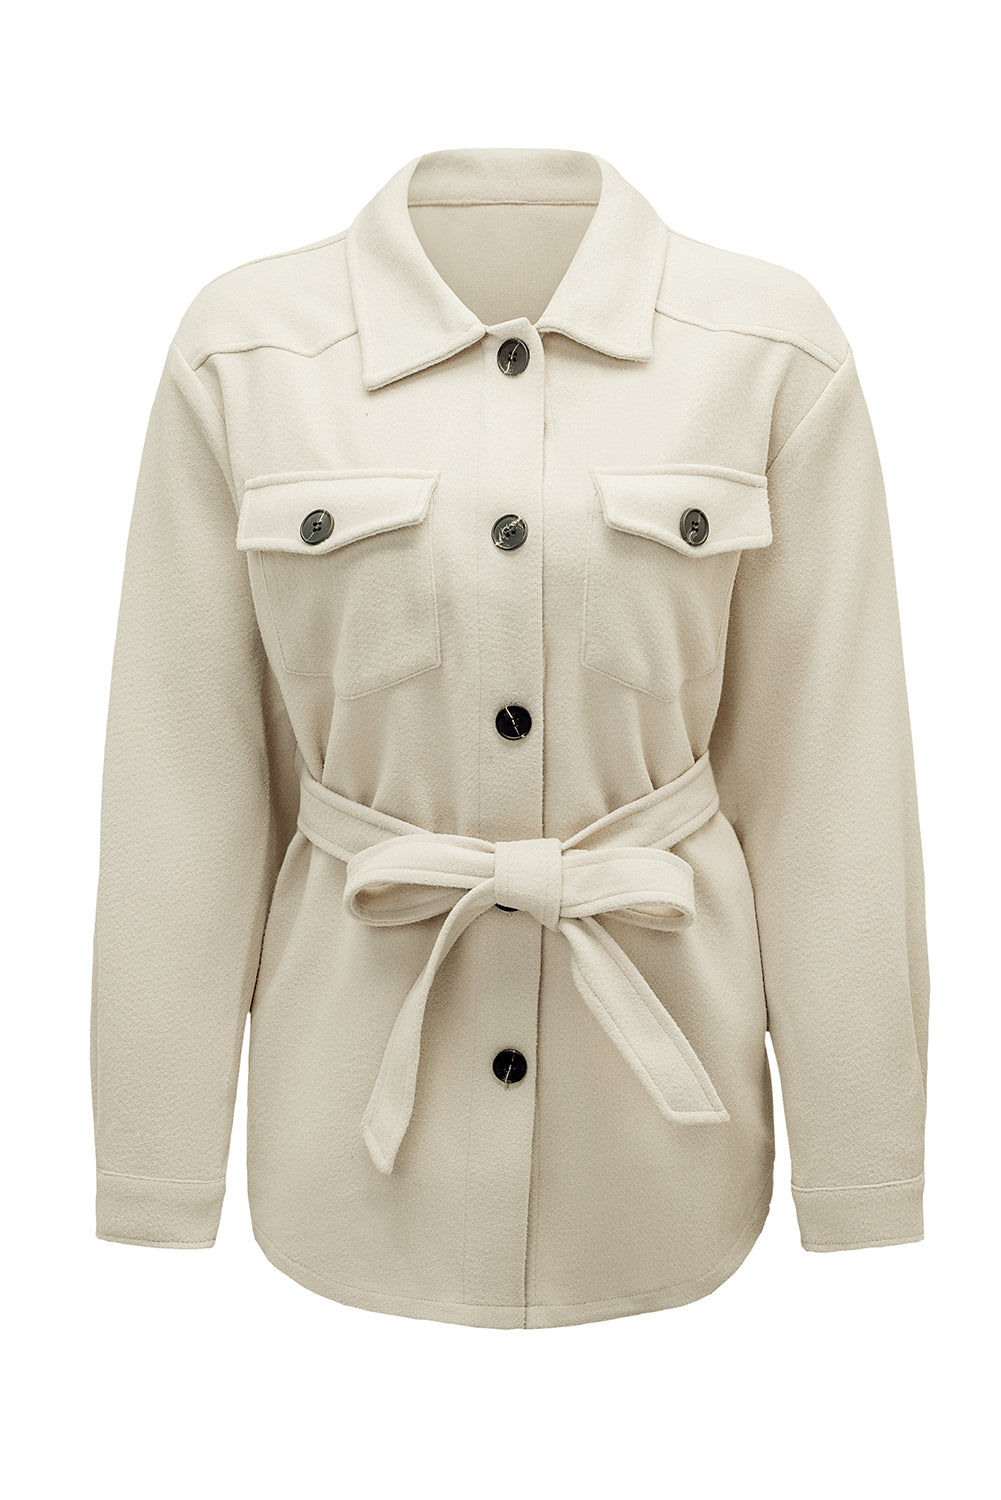 White Women's Lapel Button Down Coat Winter Belted Coat with Pockets LC8511359-1